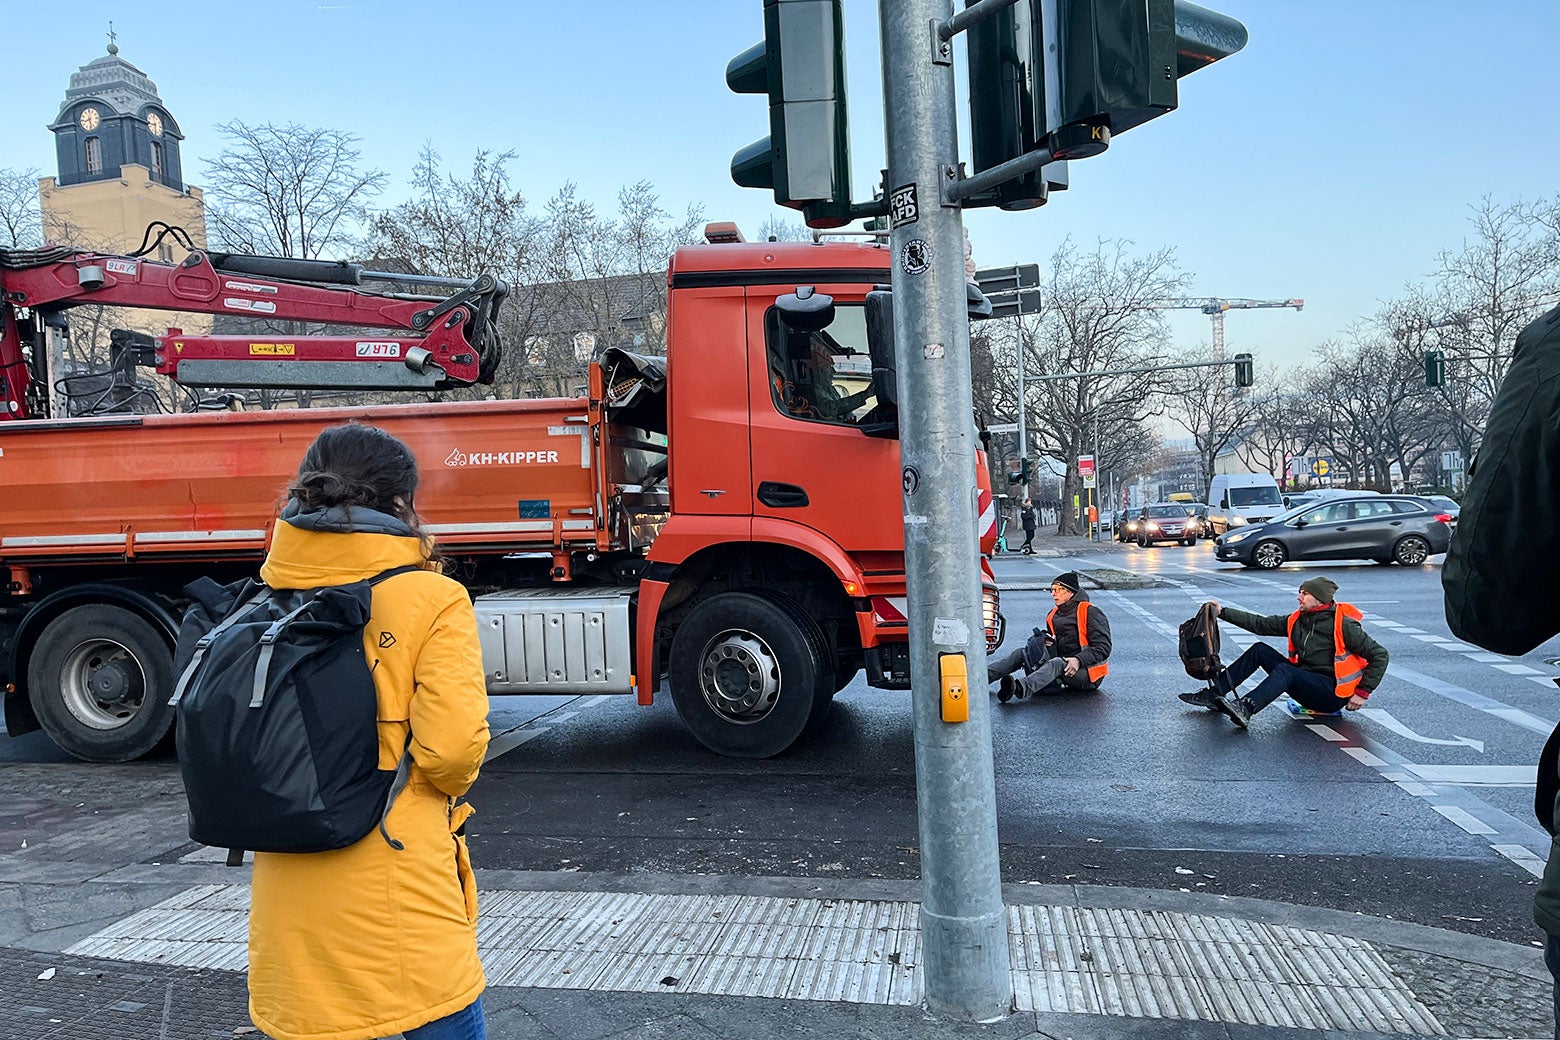 Two Letzte Generation activists try to stop a truck that has forced its way through a partially blocked intersection.